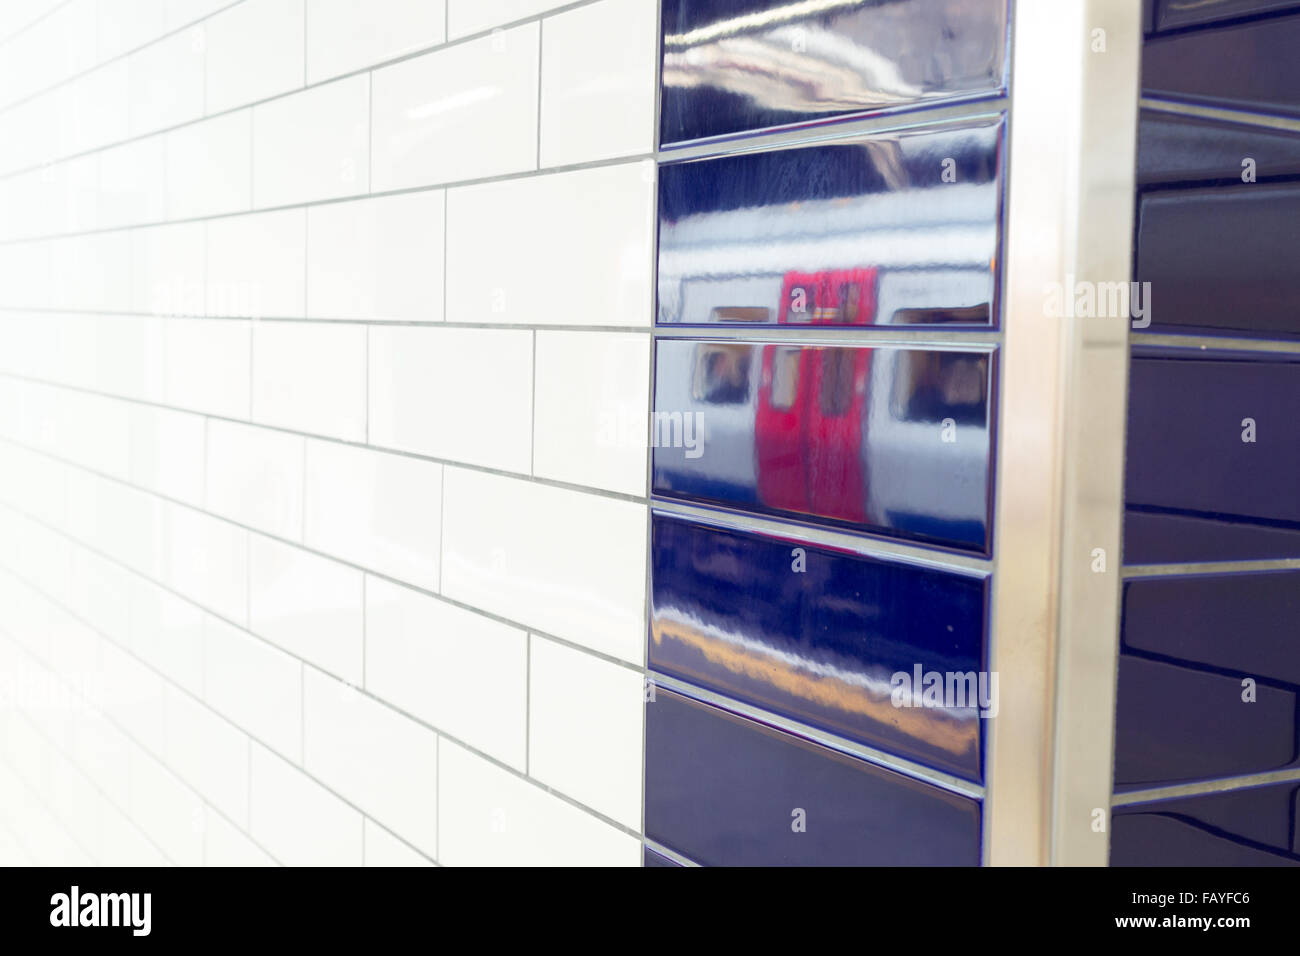 A new S-Stock tube reflection is seen on tiles at Sloane Square station. Stock Photo